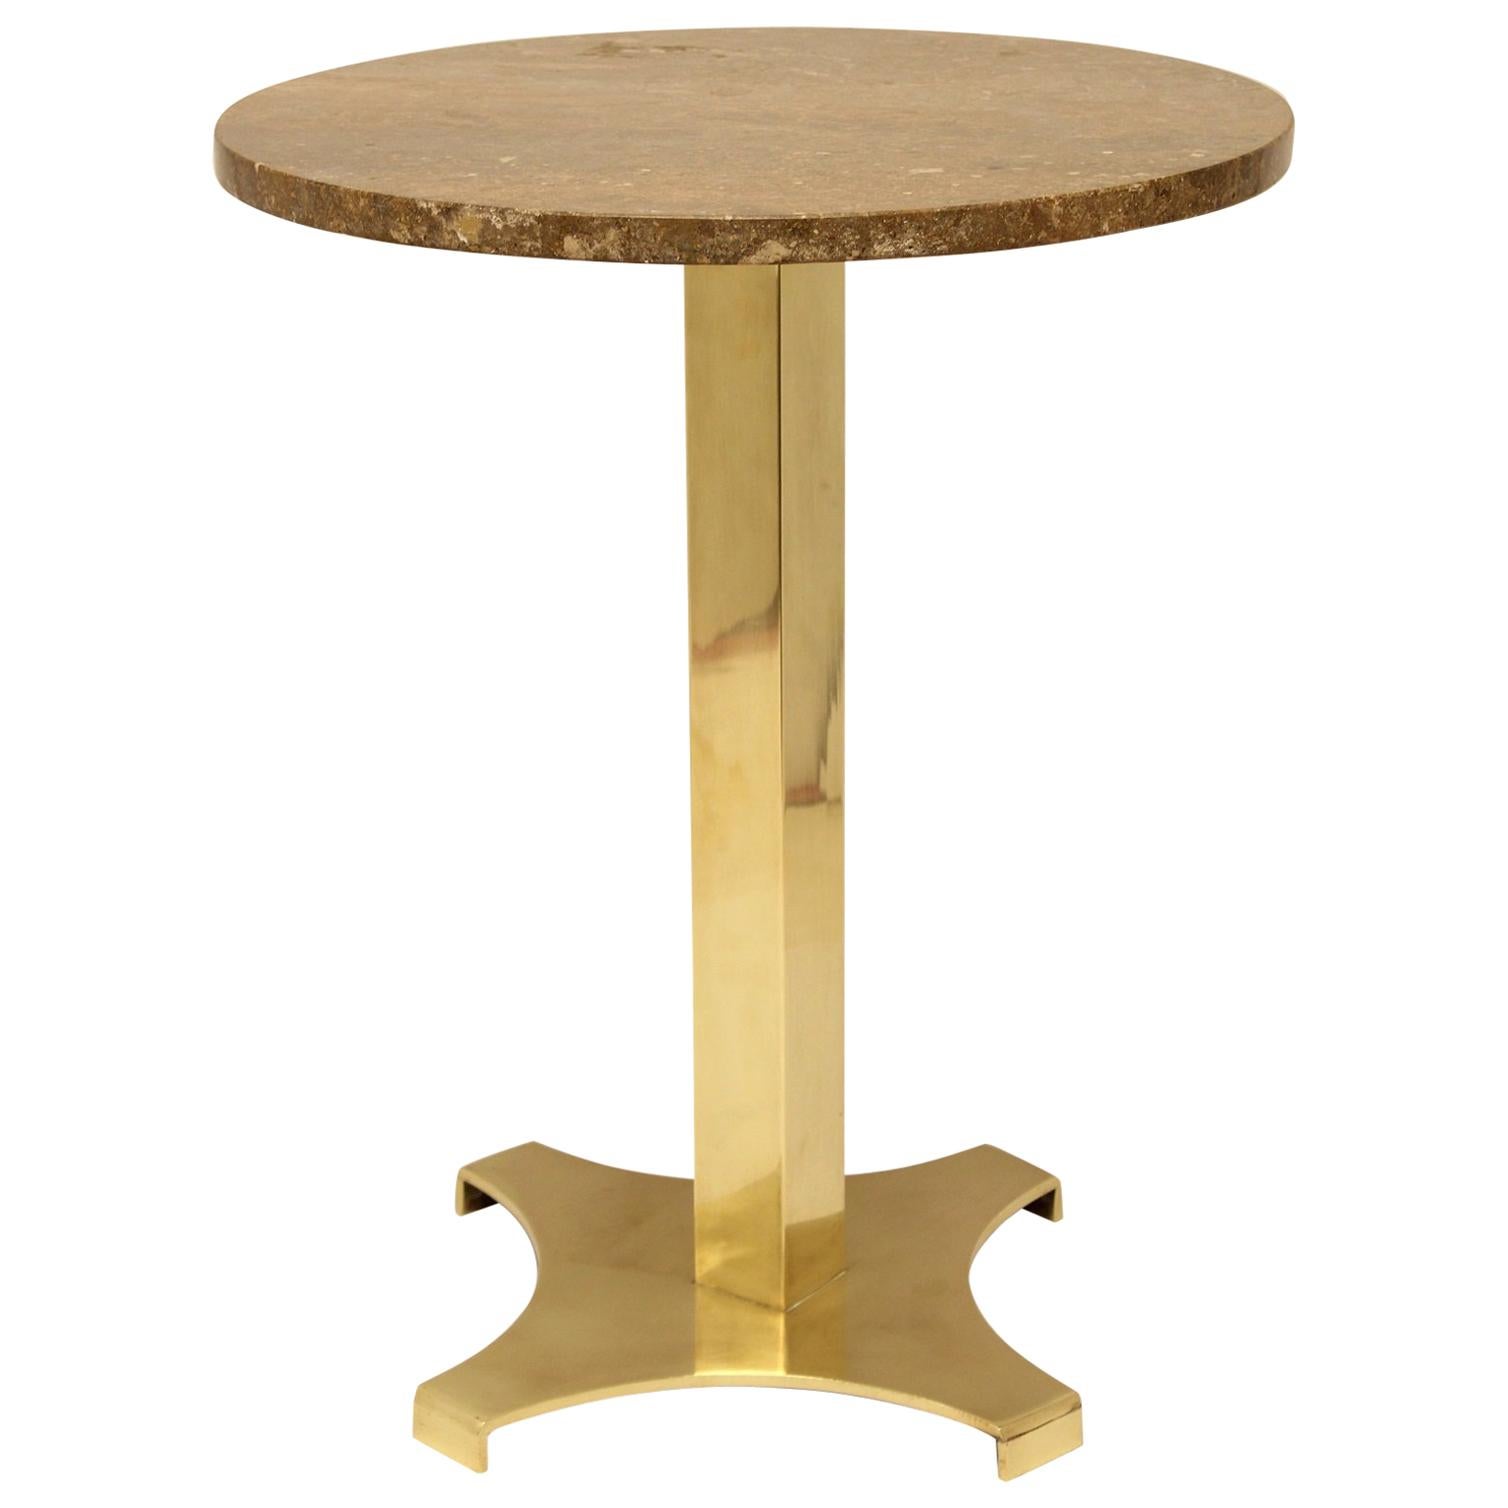 Midcentury Italian Brass and Marble Drink Table